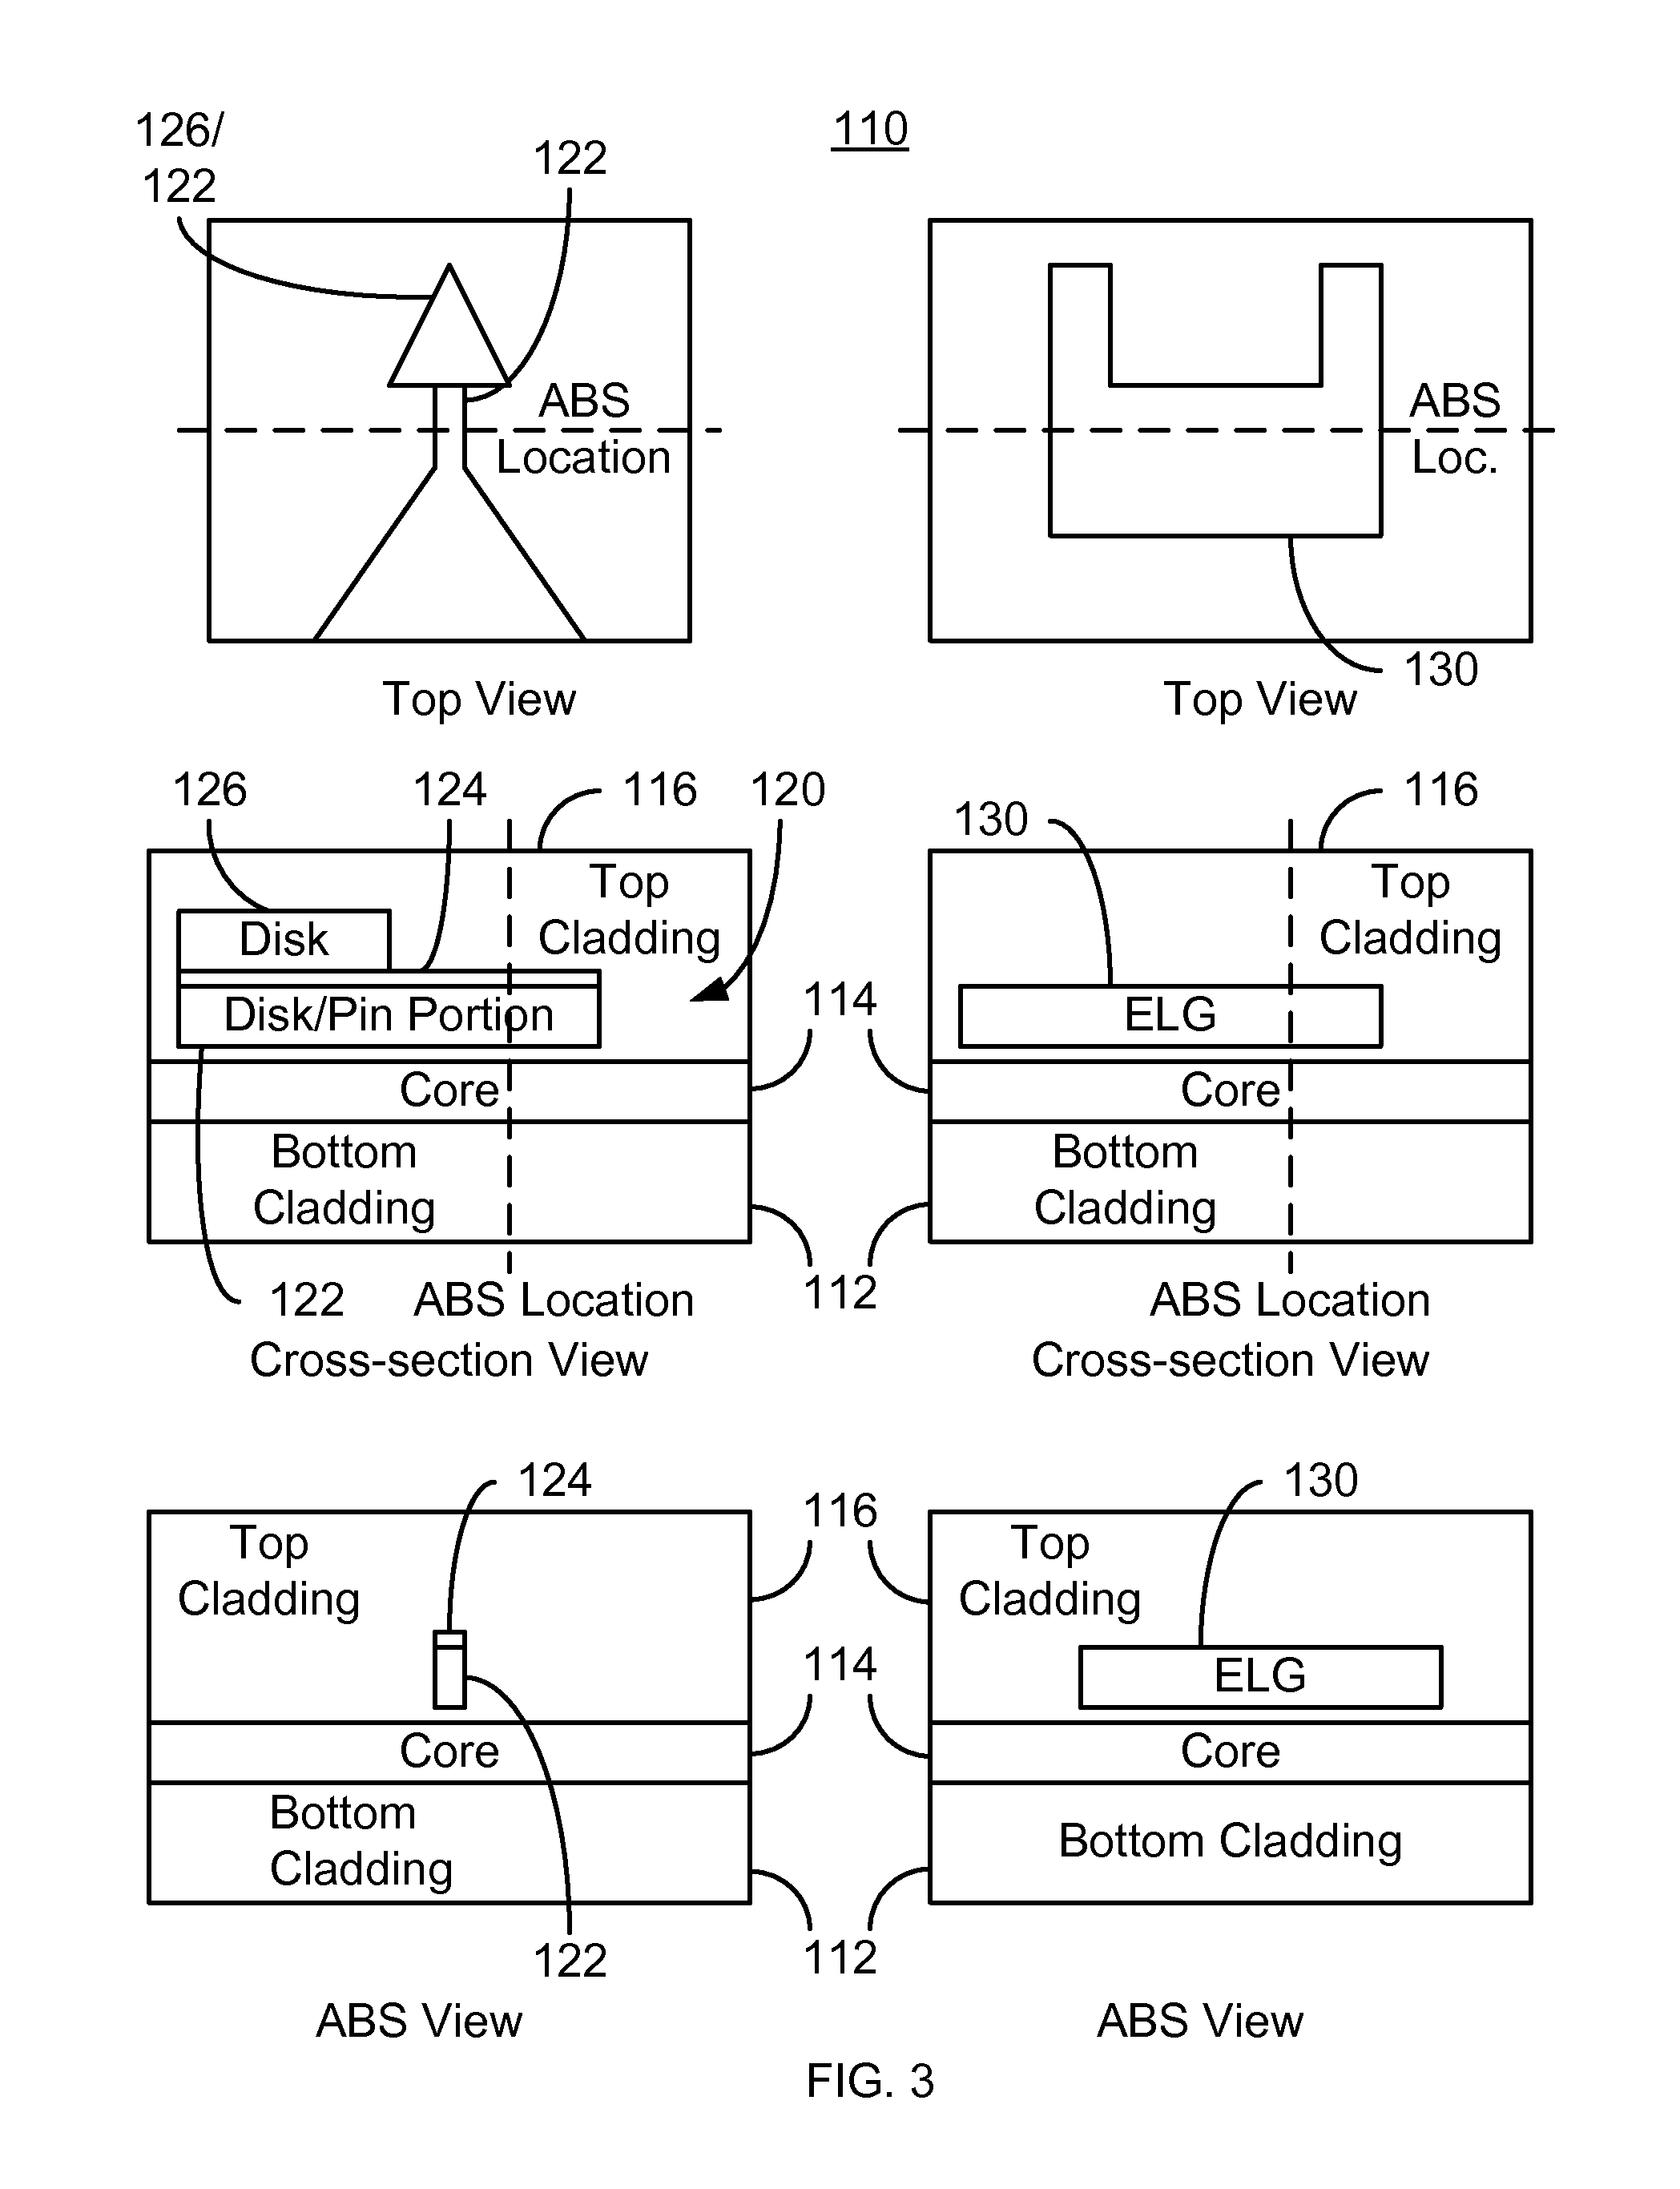 Method for providing an electronic lapping guide corresponding to a near-field transducer of an energy assisted magnetic recording transducer